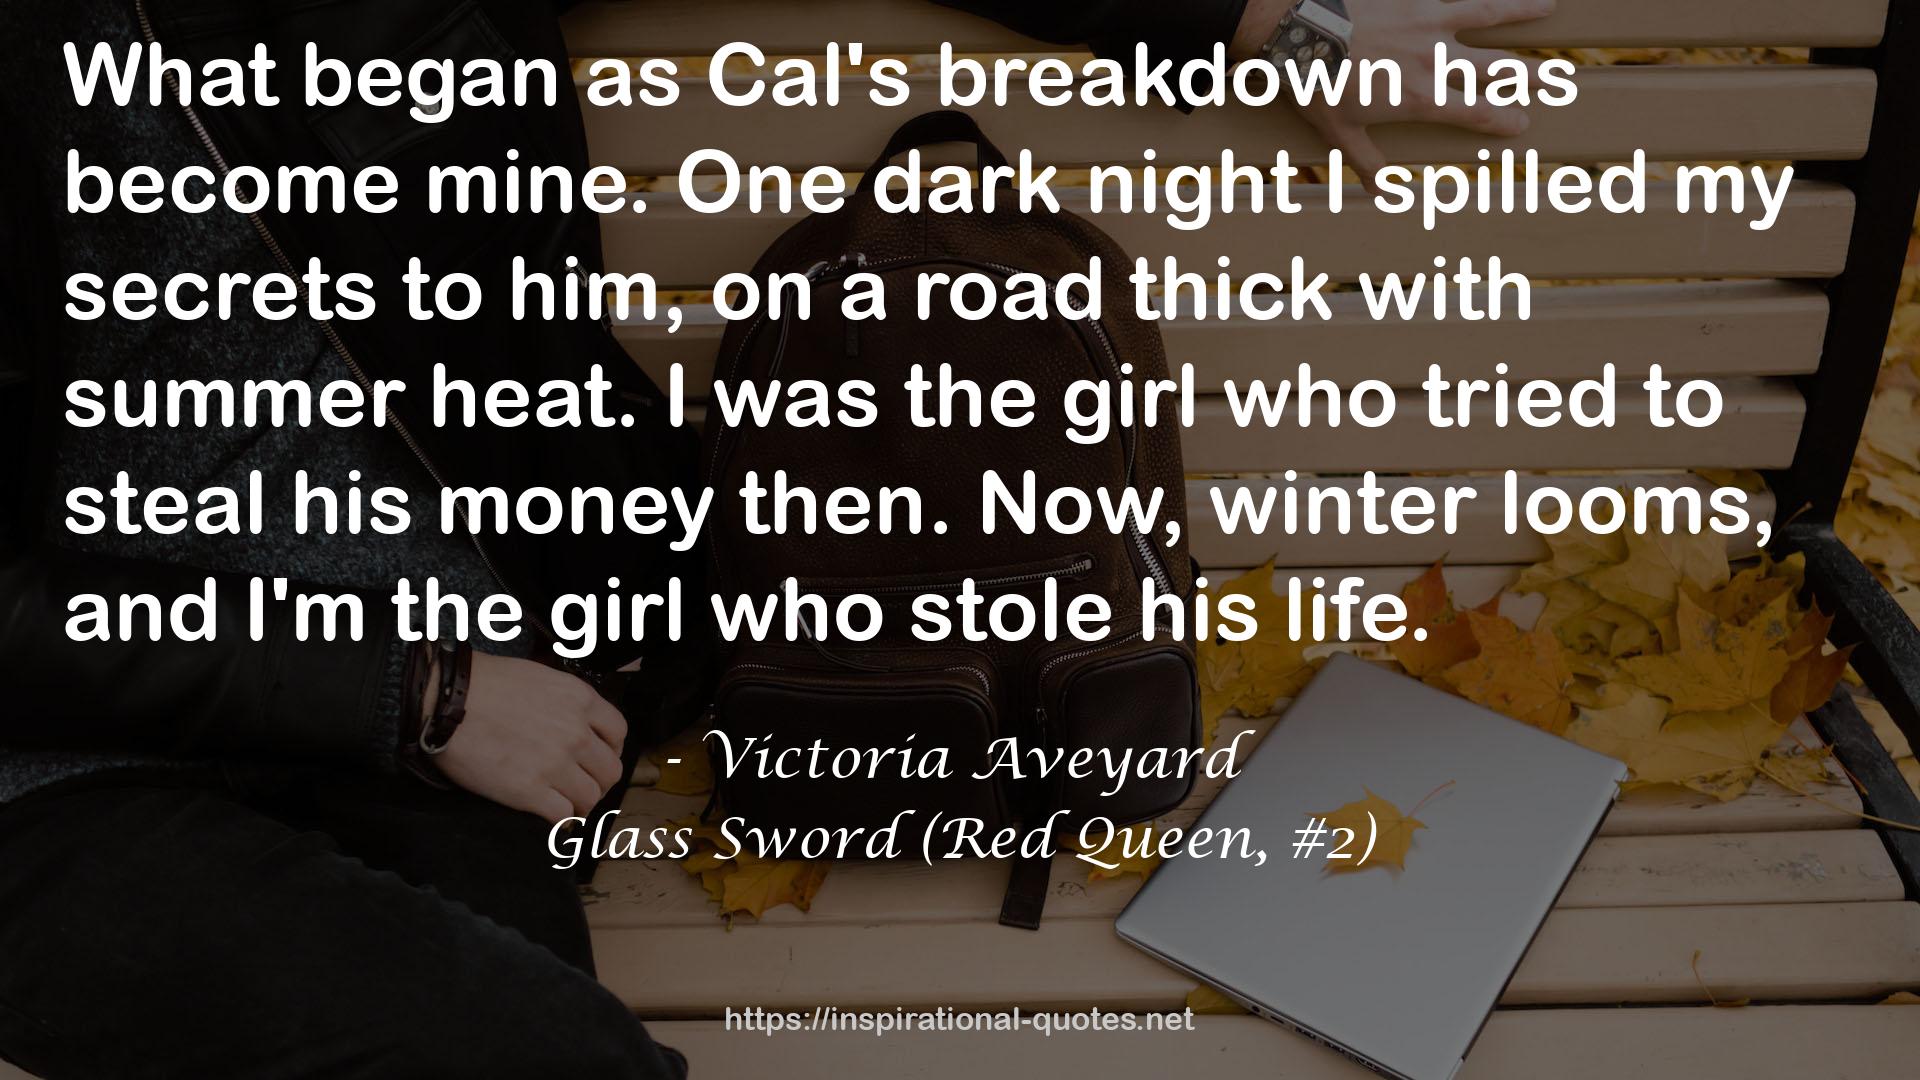 Glass Sword (Red Queen, #2) QUOTES